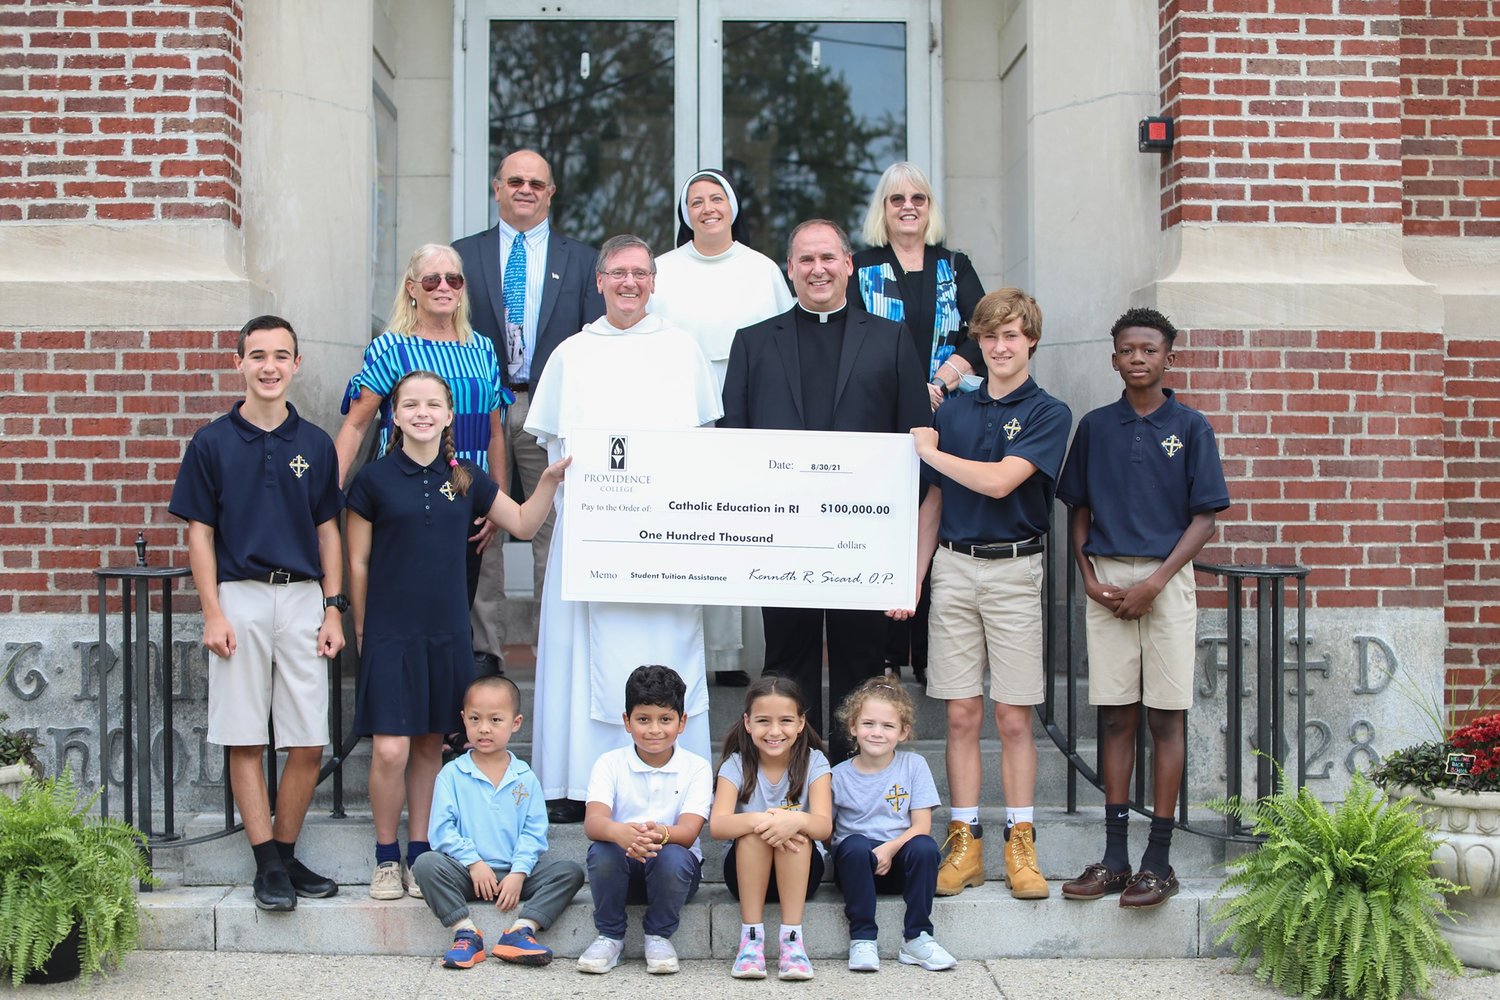 On Wednesday, Sept. 15, at St. Pius V School, Providence College presented a second gift of $100,000 to the Diocese of Providence’s Catholic School Office to support Catholic education in Rhode Island through its FriarServe program. Principals from St. Rocco School, Blessed Sacrament School, St. Pius V School and St. Augustine School were in attendance.